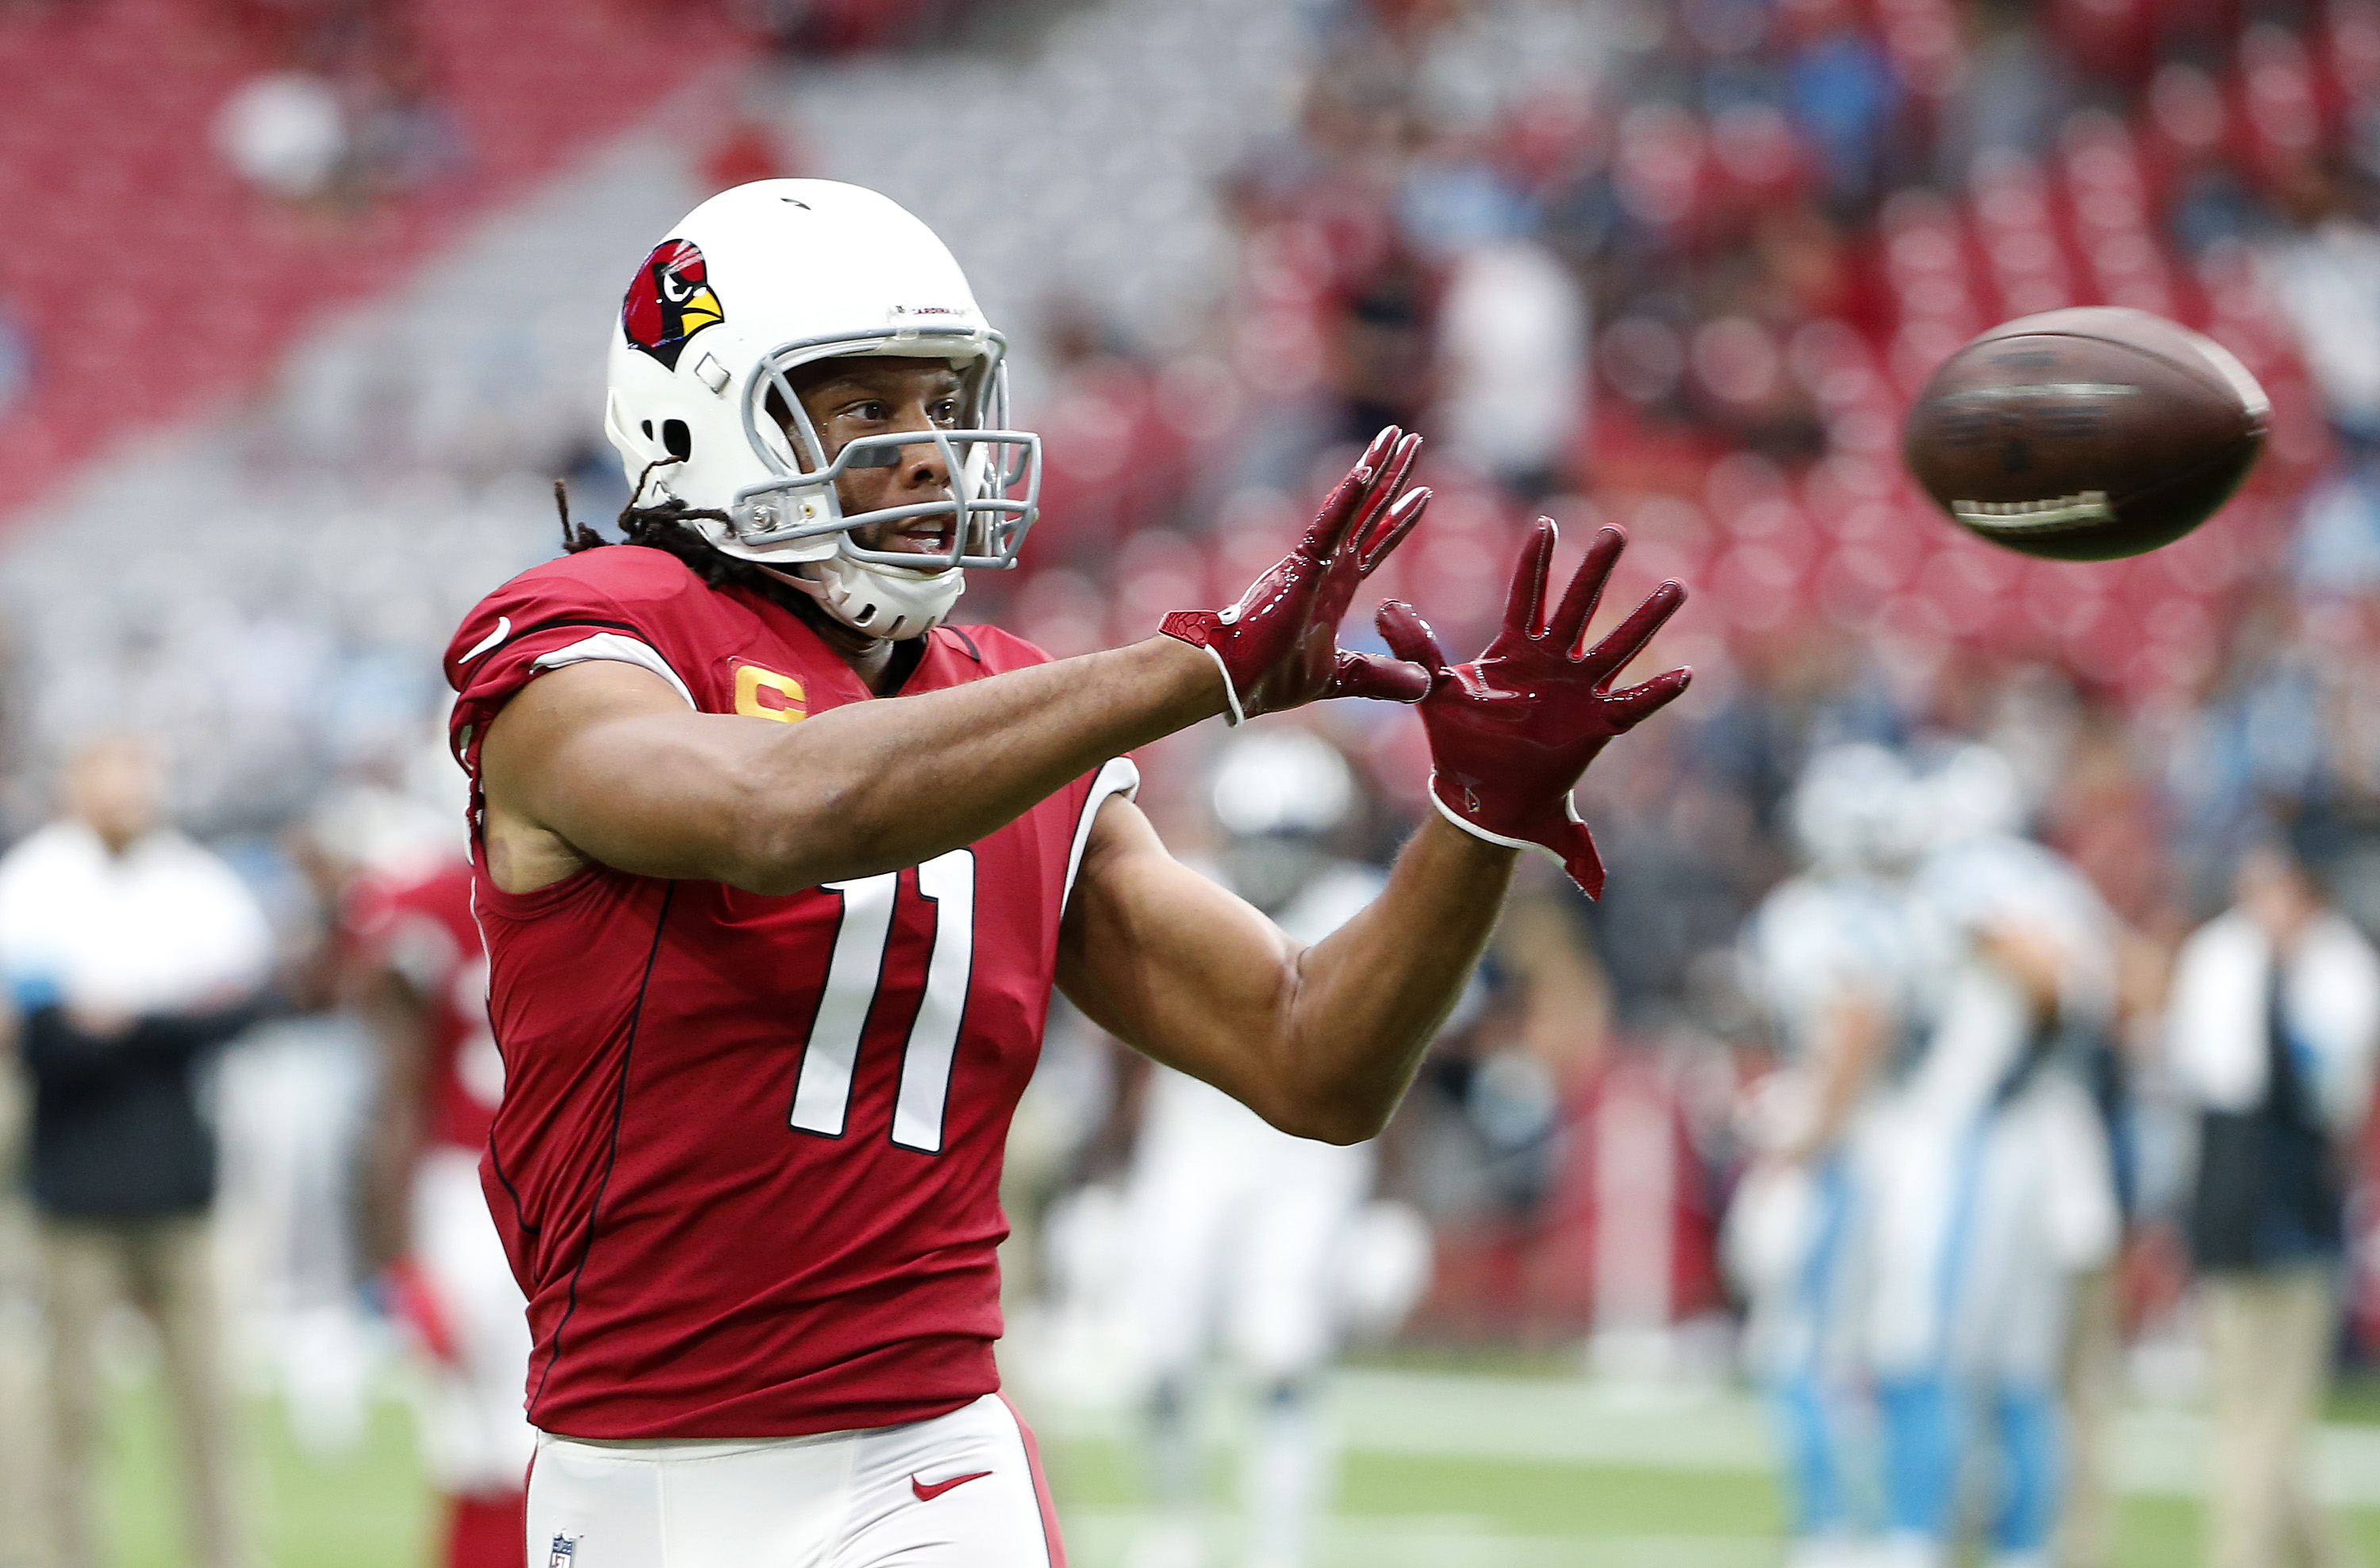 Larry Fitzgerald is an ageless wonder in the NFL. At 36 years old, the Cardinals legend still might have the best hands in the league.